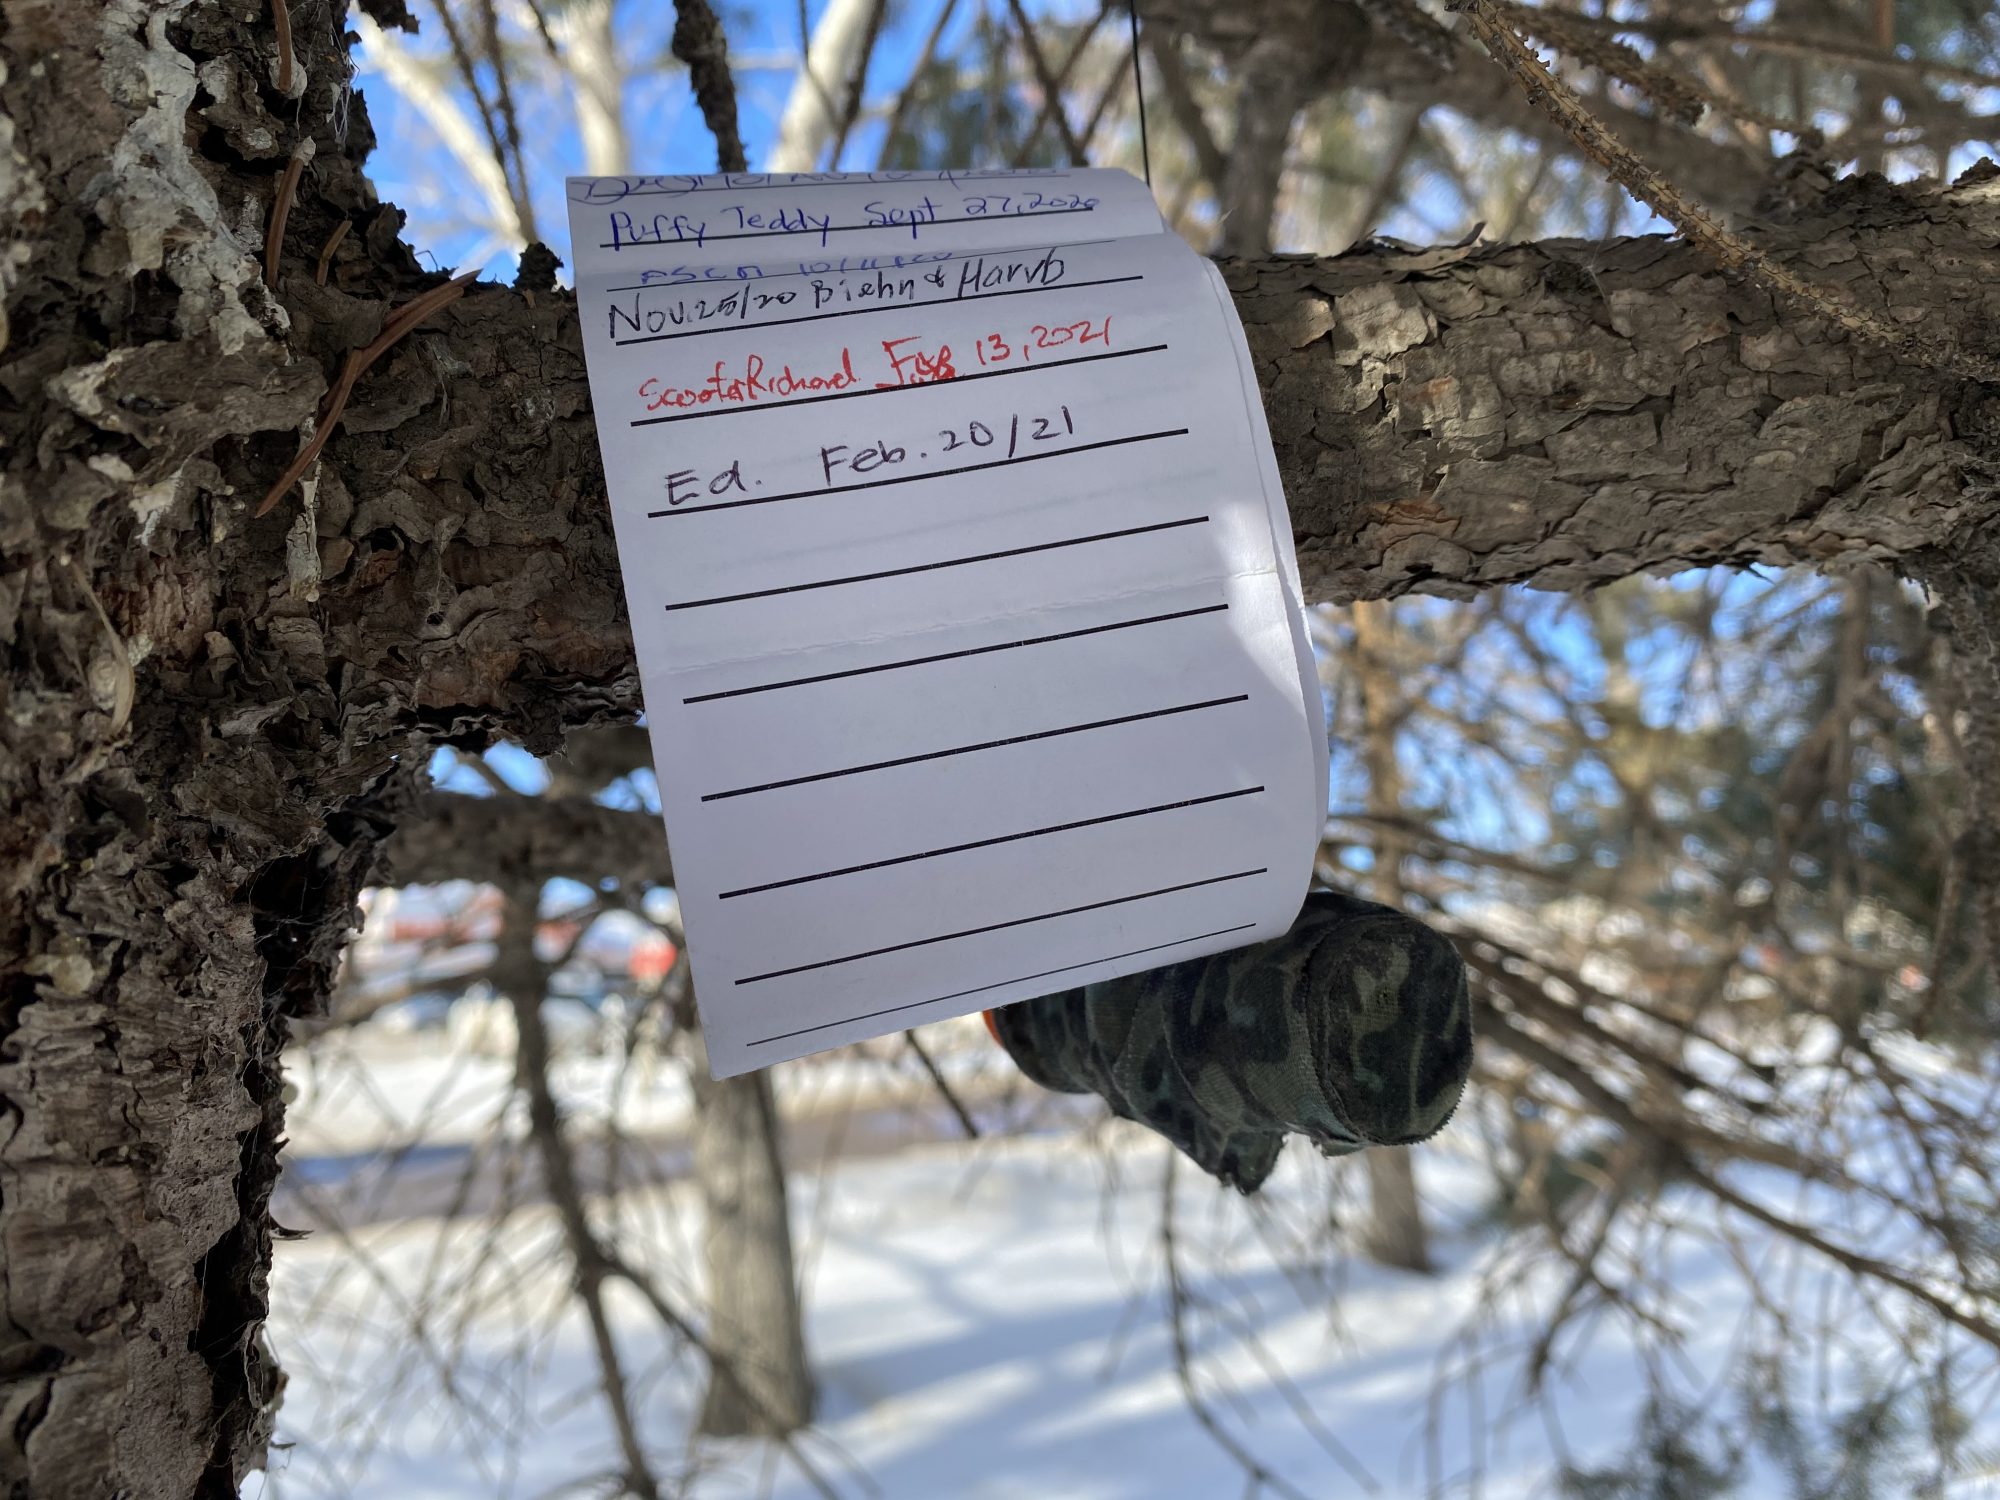 The unrolled geocache log, signed by Ed.